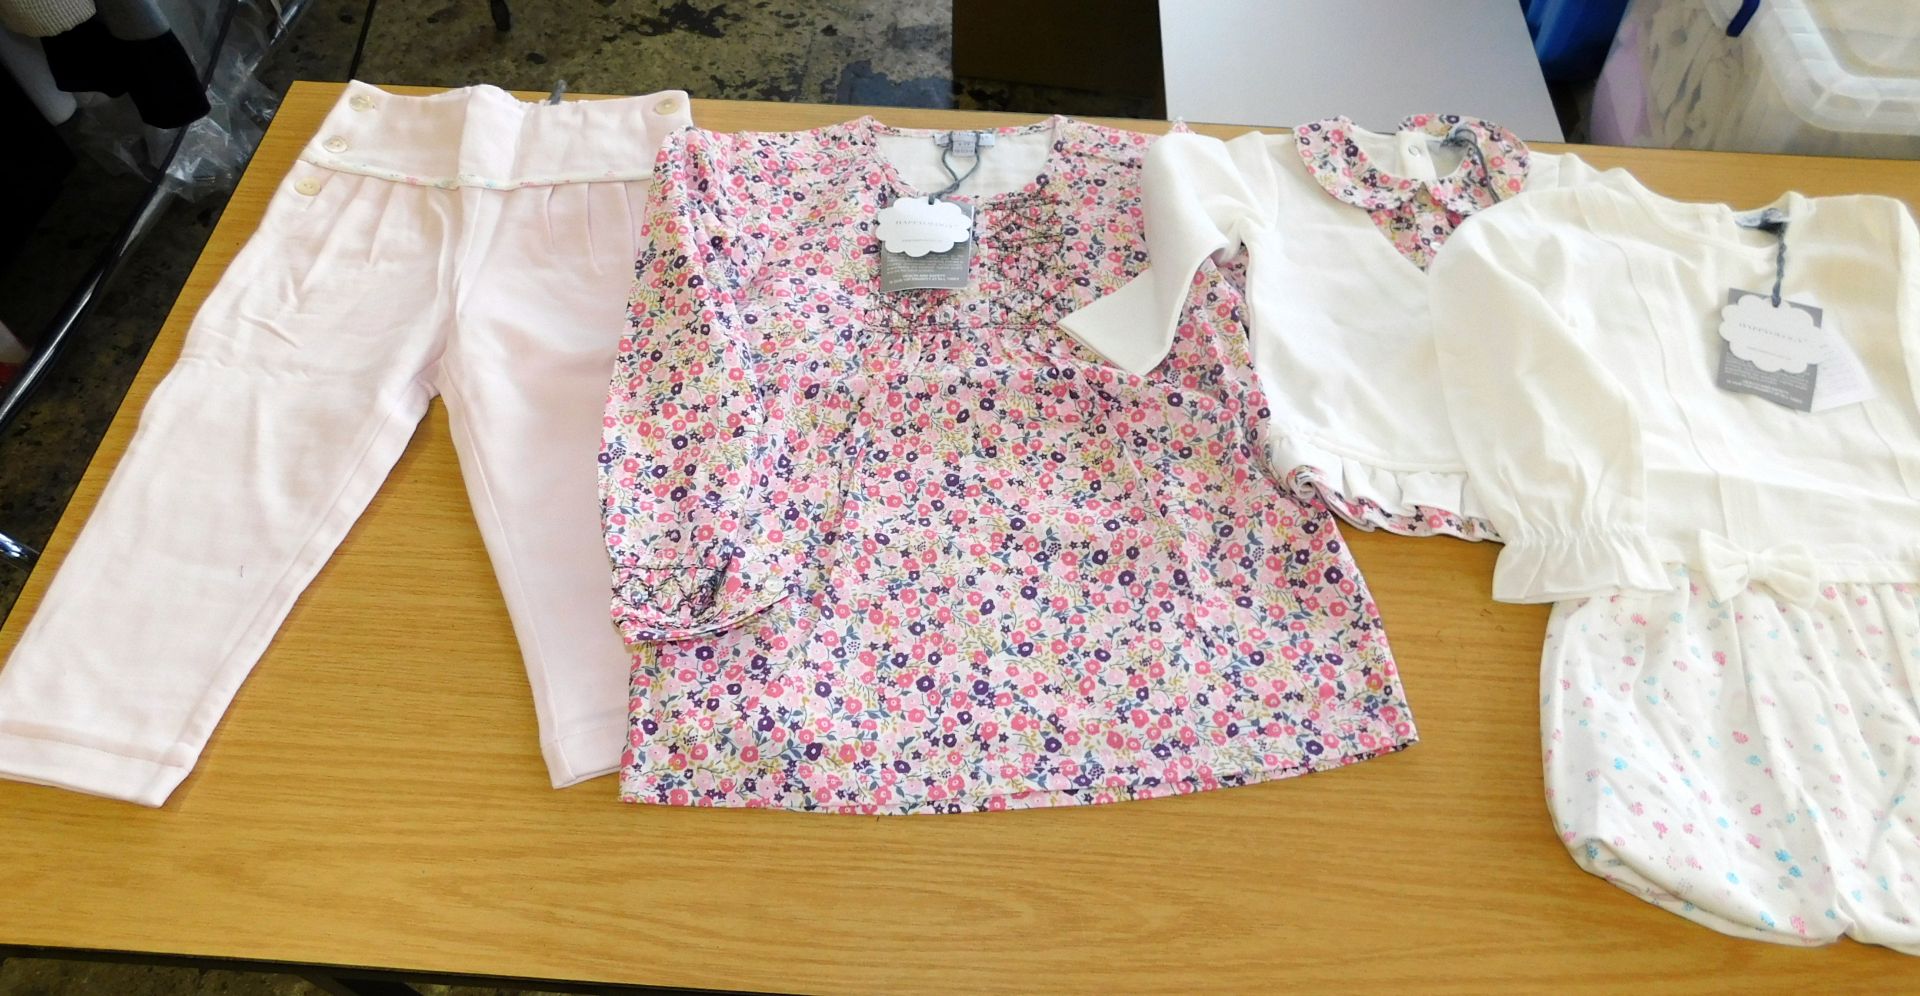 200 Pieces of Happyology Children’s Clothing To Include:- 28 pink trousers, 4 pink floral tops, 8